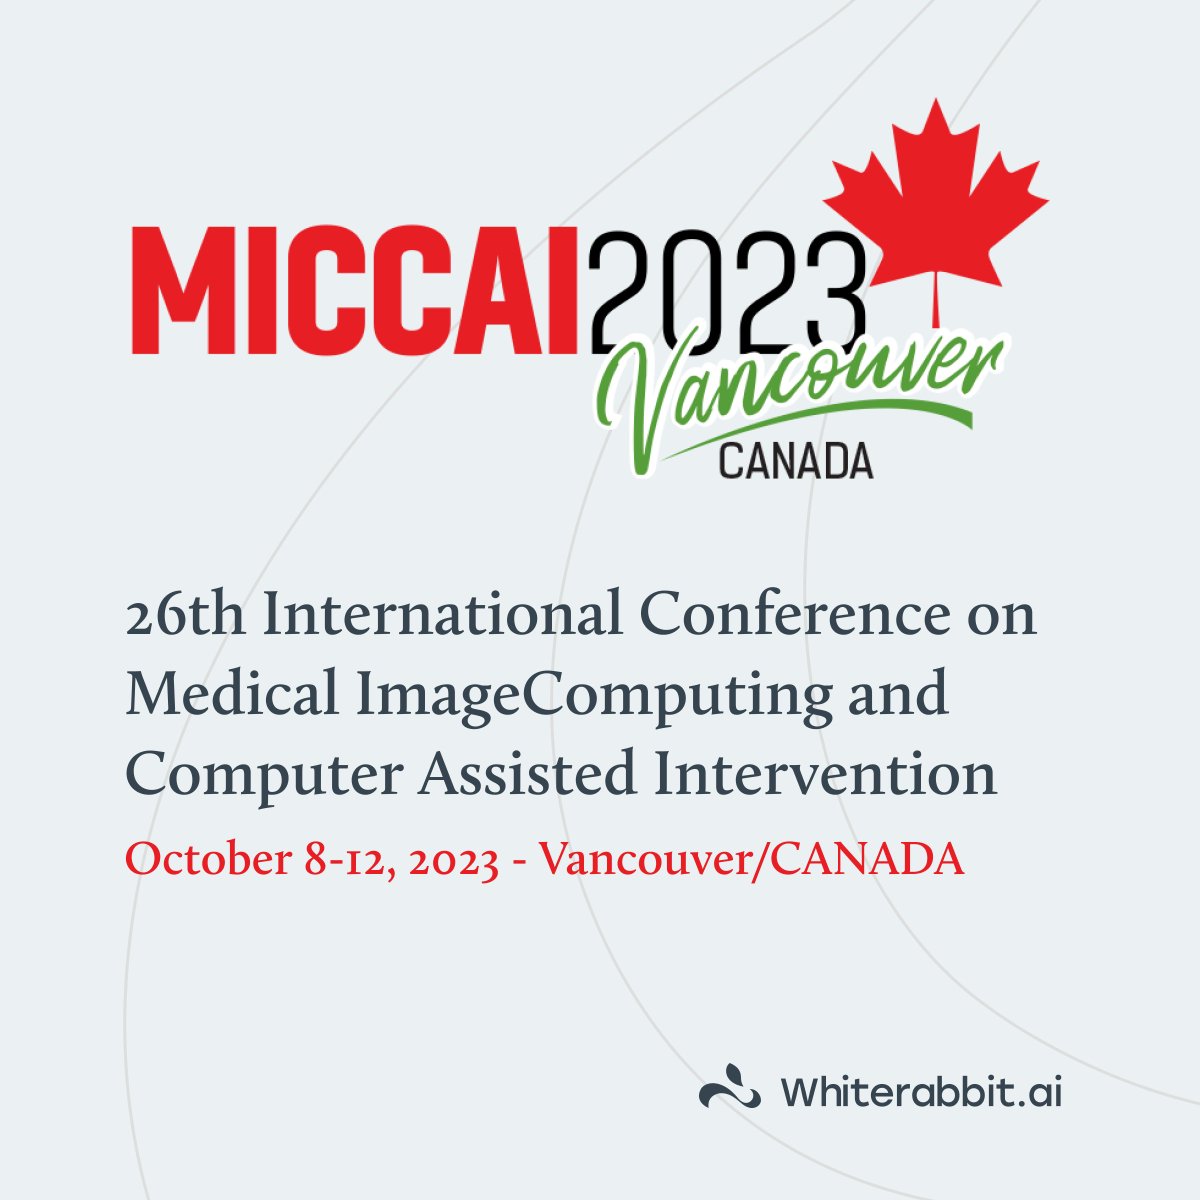 We’ll be at #MICCAI2023 in Vancouver, Canada on 10/8-12. Nhi Truong, research scientist, will present, 'M&M: Tackling False Positives in Mammography with a Multi-view and Multi-instance Learning Sparse Detector,' on Tues 10/10, at 1-2:30pm PDT. Register: conferences.miccai.org/2023/en/defaul…